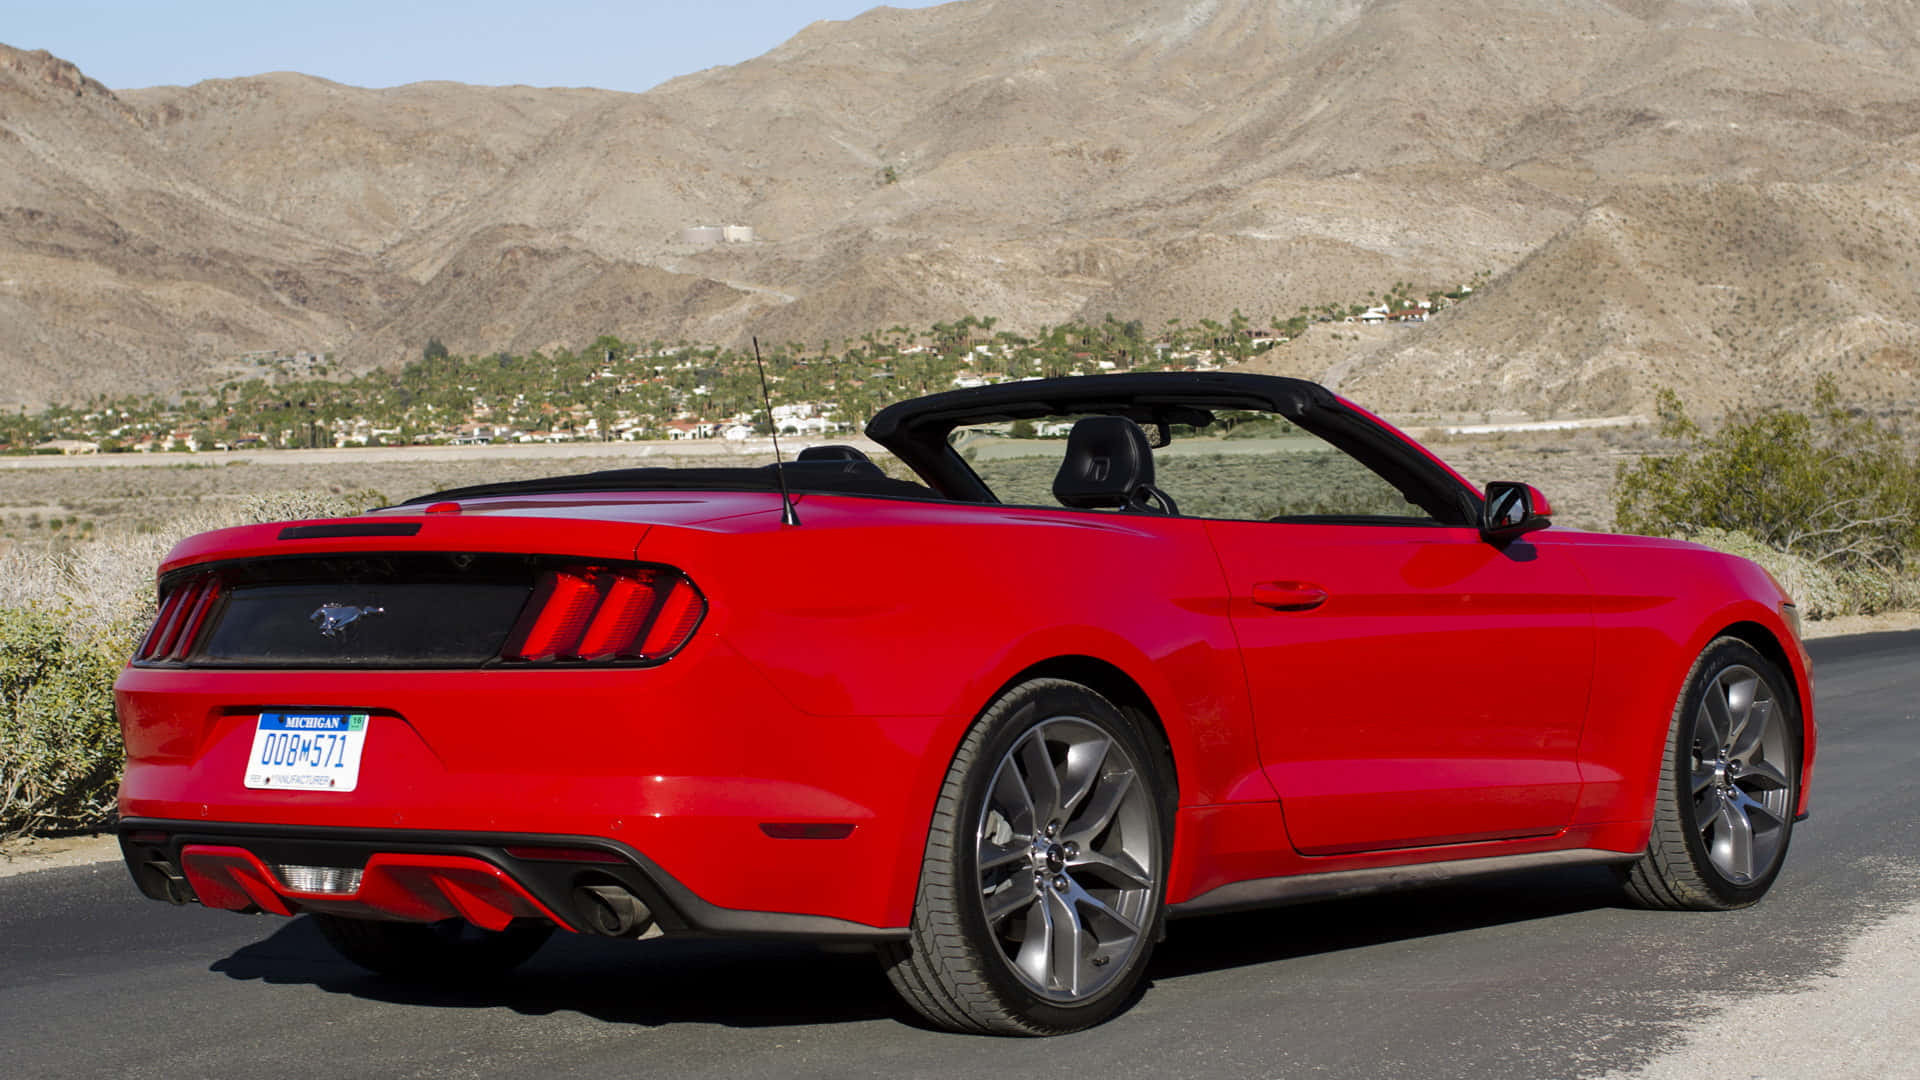 Sleek Ford Mustang Ecoboost on the open road Wallpaper